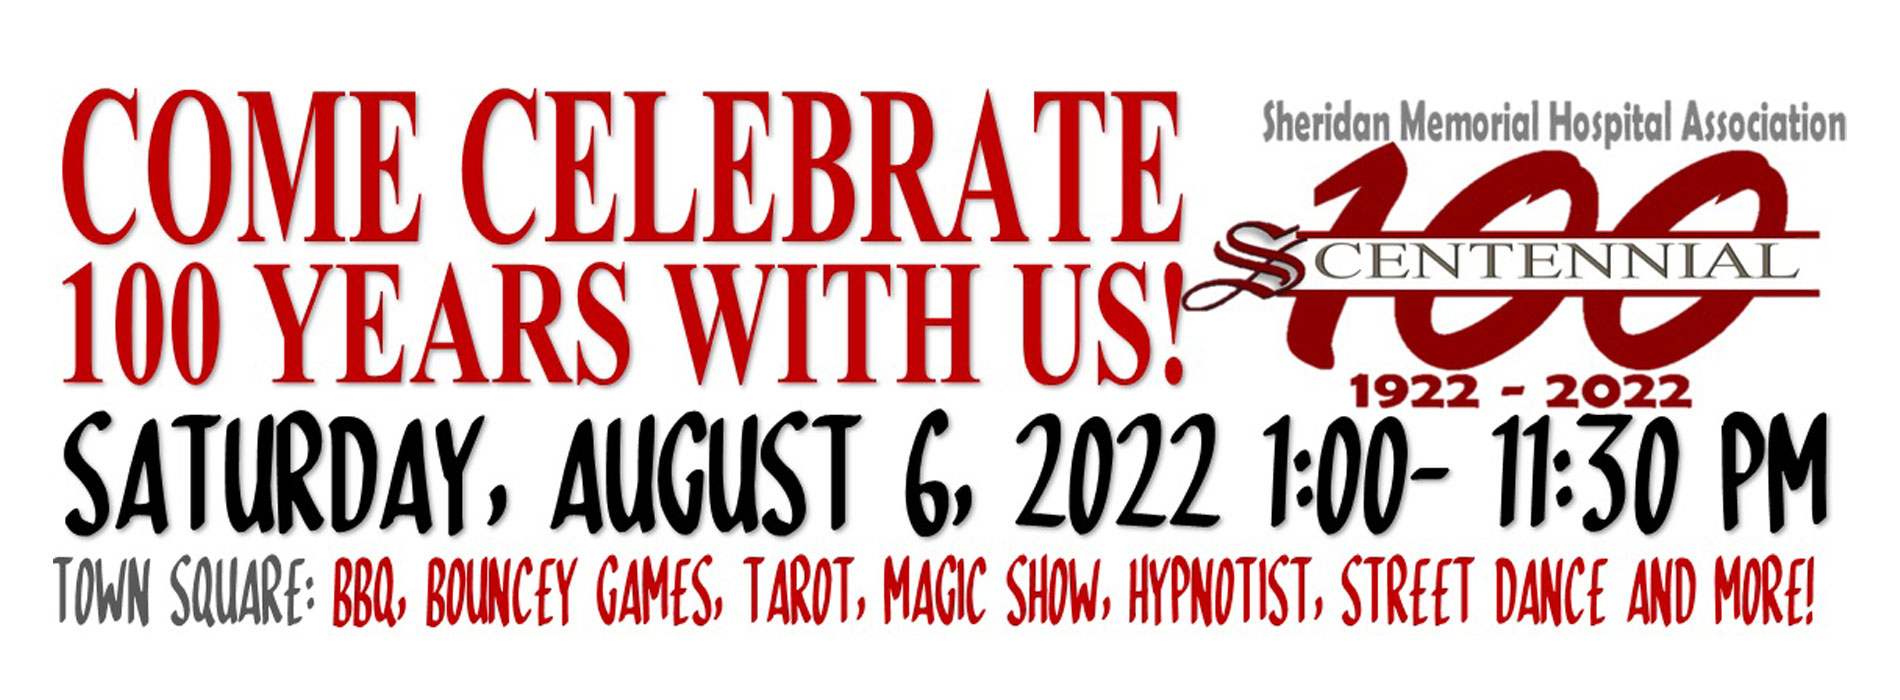 Banner that says:
COME CELEBRATE 100 YEARS WITH US!

Sheridan Memorial Hospital Association
100 S-CENTENNIAL 
1922-2022

Centennial Celebration August 6, 2022 1:00 - 11:30 pm at Town Square: BBQ, BOUNCY GAMES, TAROT, MAGIC SHOW, HYPNOTIST, STREET DANCE AND MORE!